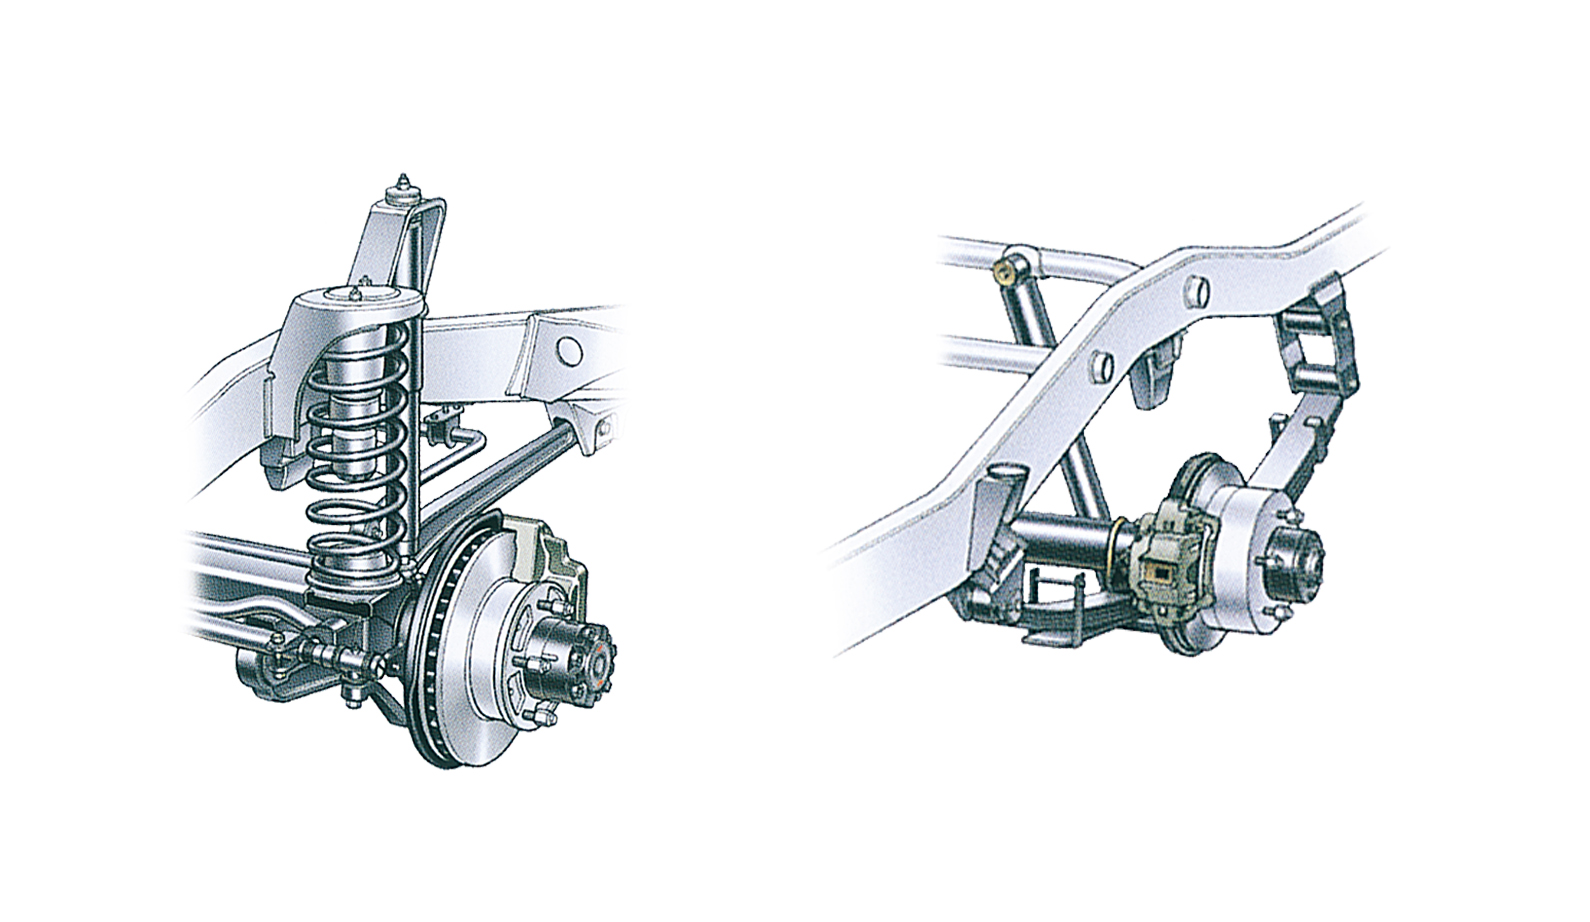 Land Cruiser 70 coil spring (front) and leaf spring (rear) suspensions (Japan commemorative re-release)